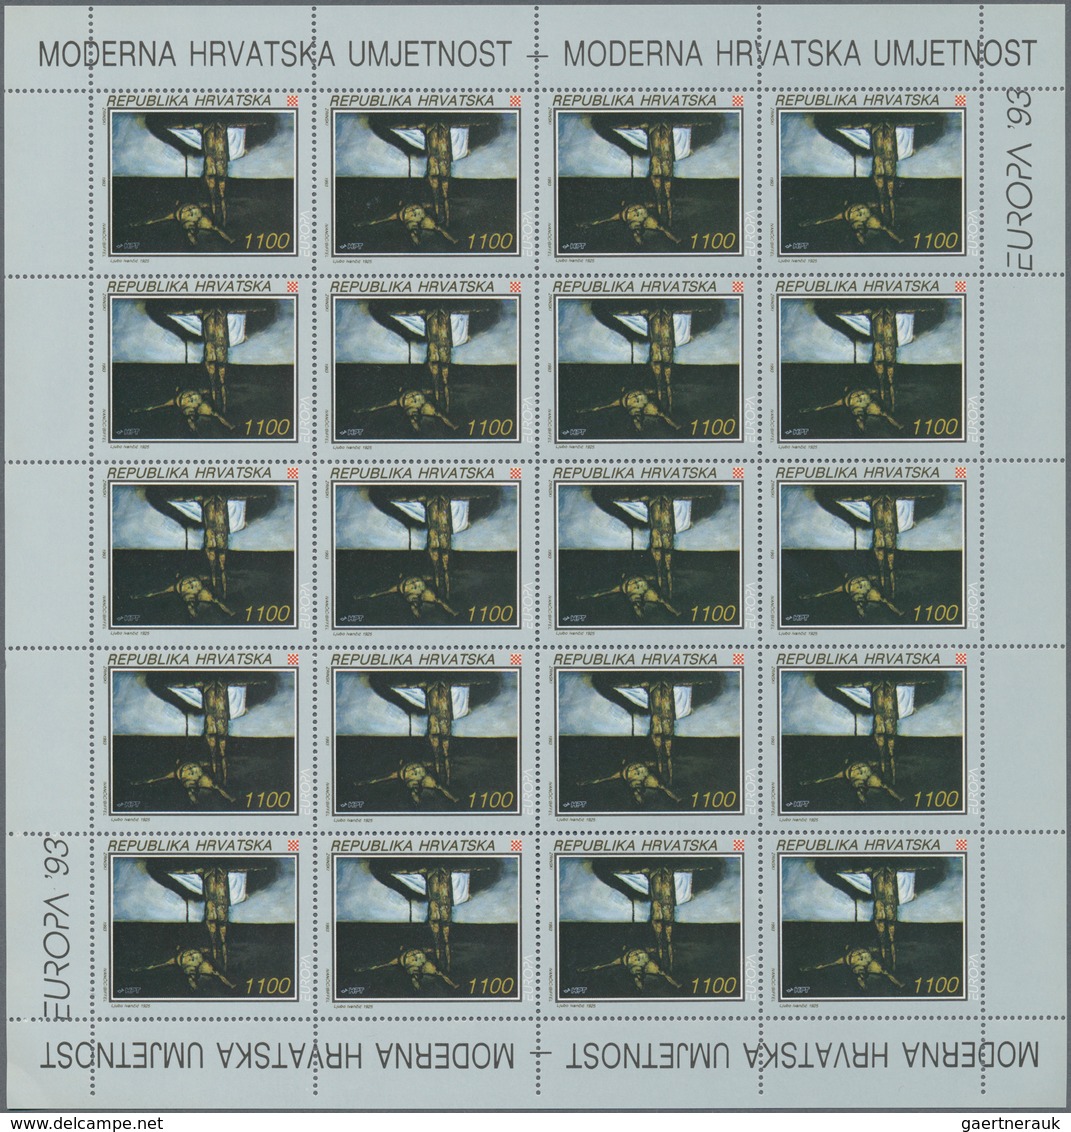 27151 Kroatien: 1993, Europa, 1040 Sets In 65 Sheets Of 16 Stamps Each Issue, Mint Never Hinged. Michel 62 - Croatia